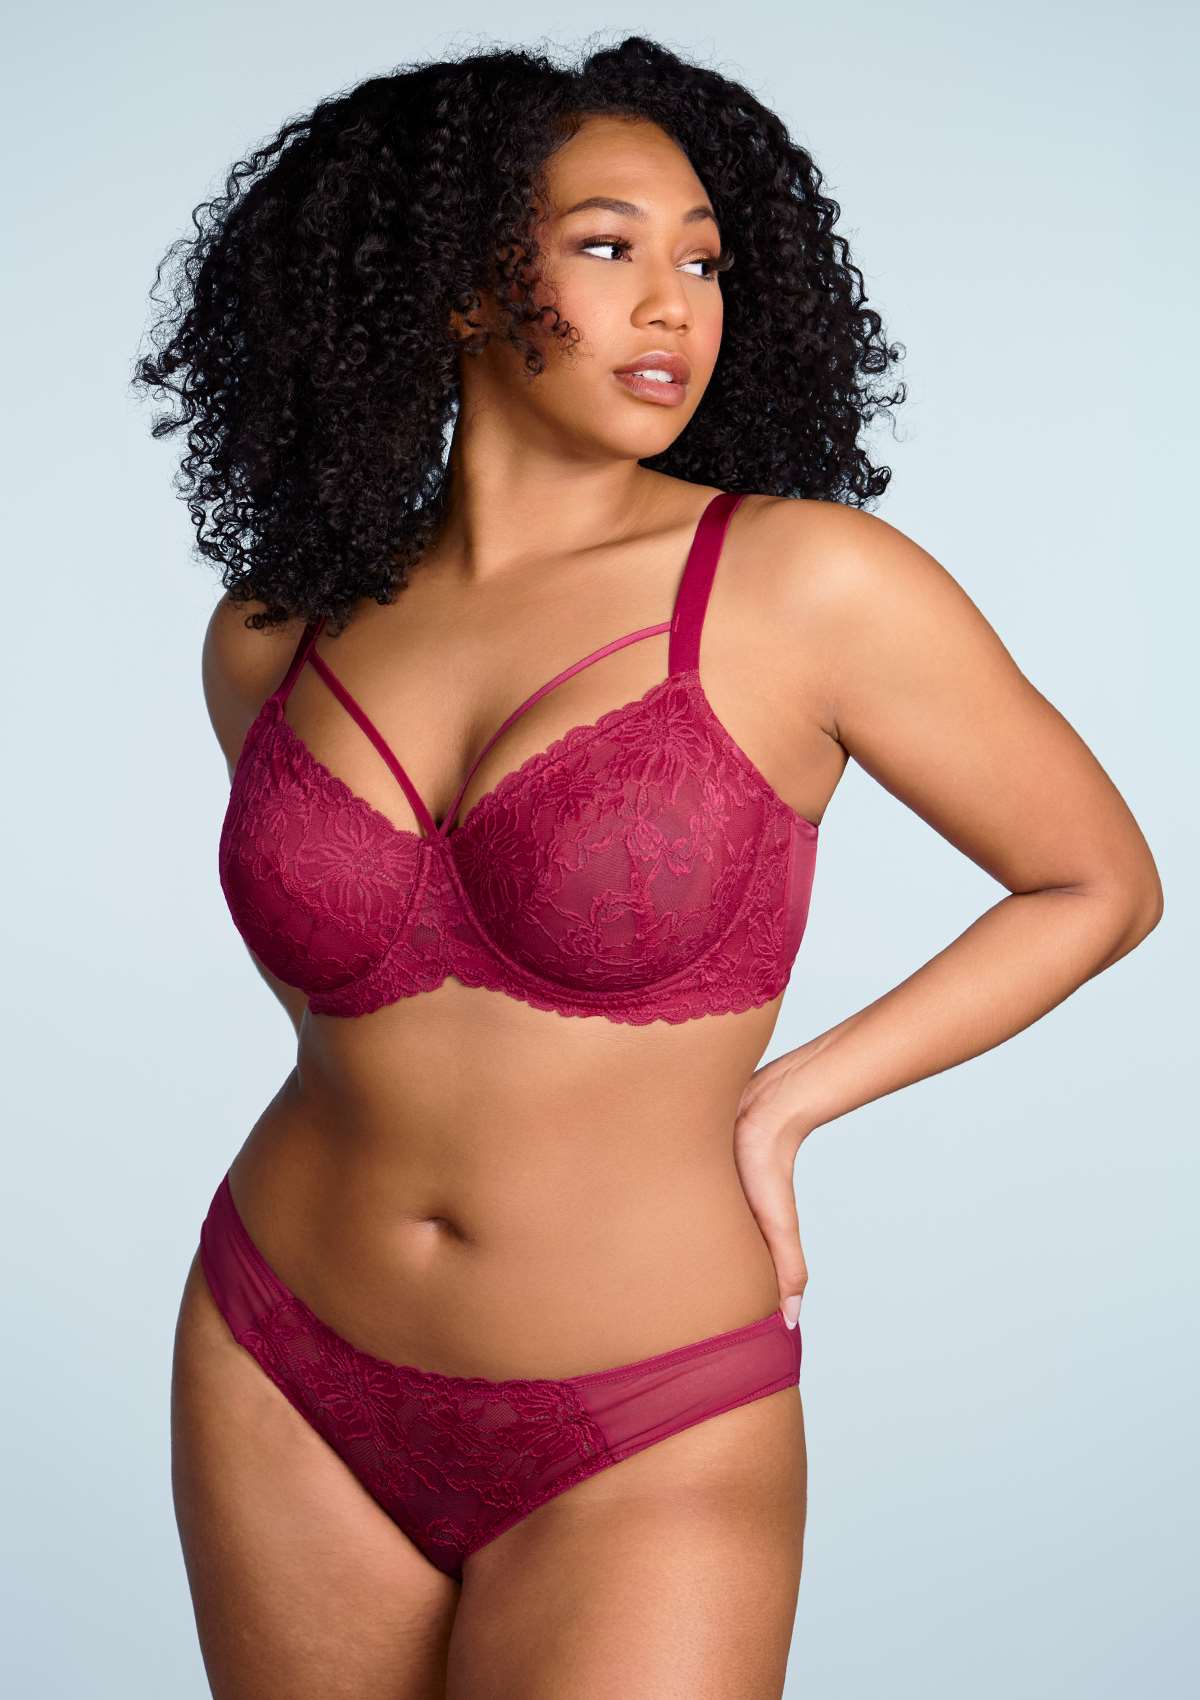 HSIA Pretty In Petals Lace Panties And Bra Set: Plus Size Women Bra - Red / 40 / I